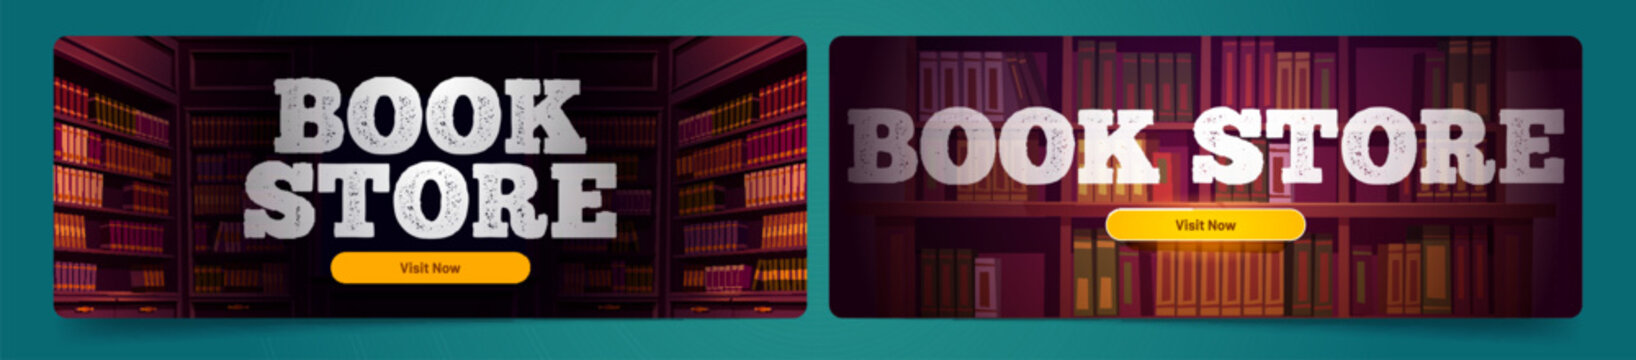 Book store cartoon web banners, online shop landing page templates with bookcases in dark room and grunge typography. Digital library archive, reading app or service for readers Vector illustration